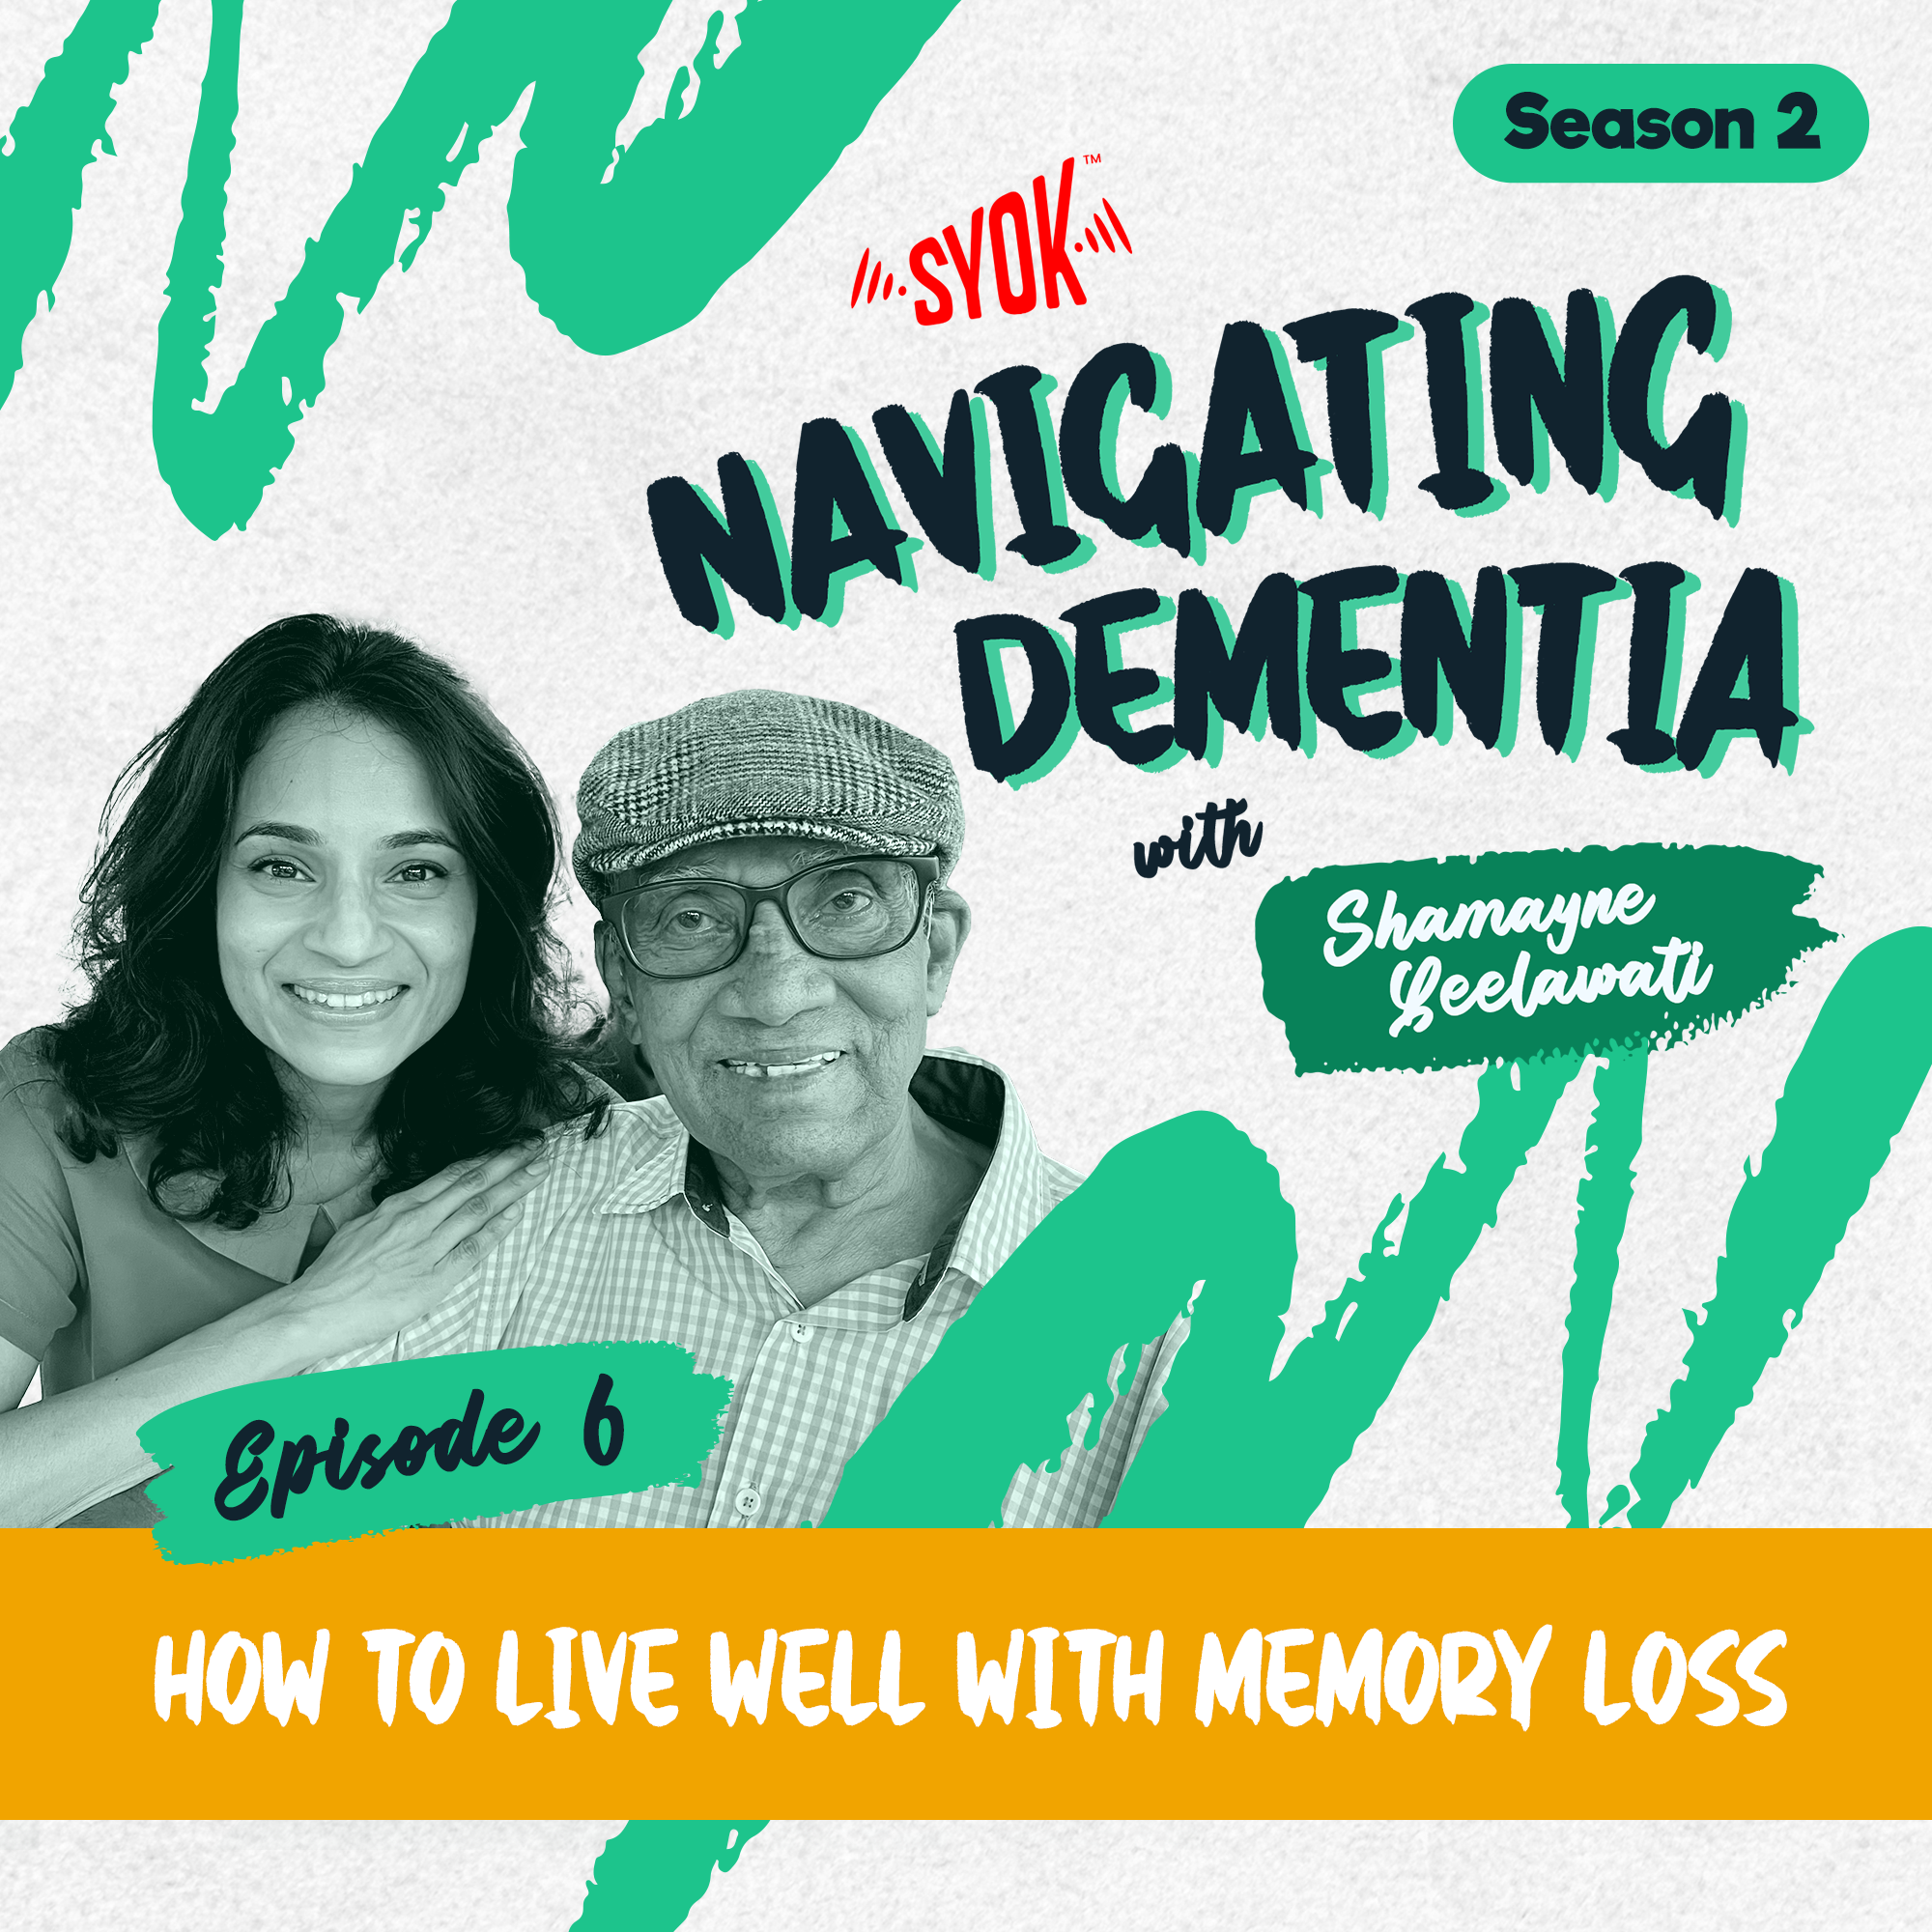 How to live well with memory loss | Navigating Dementia S2E6